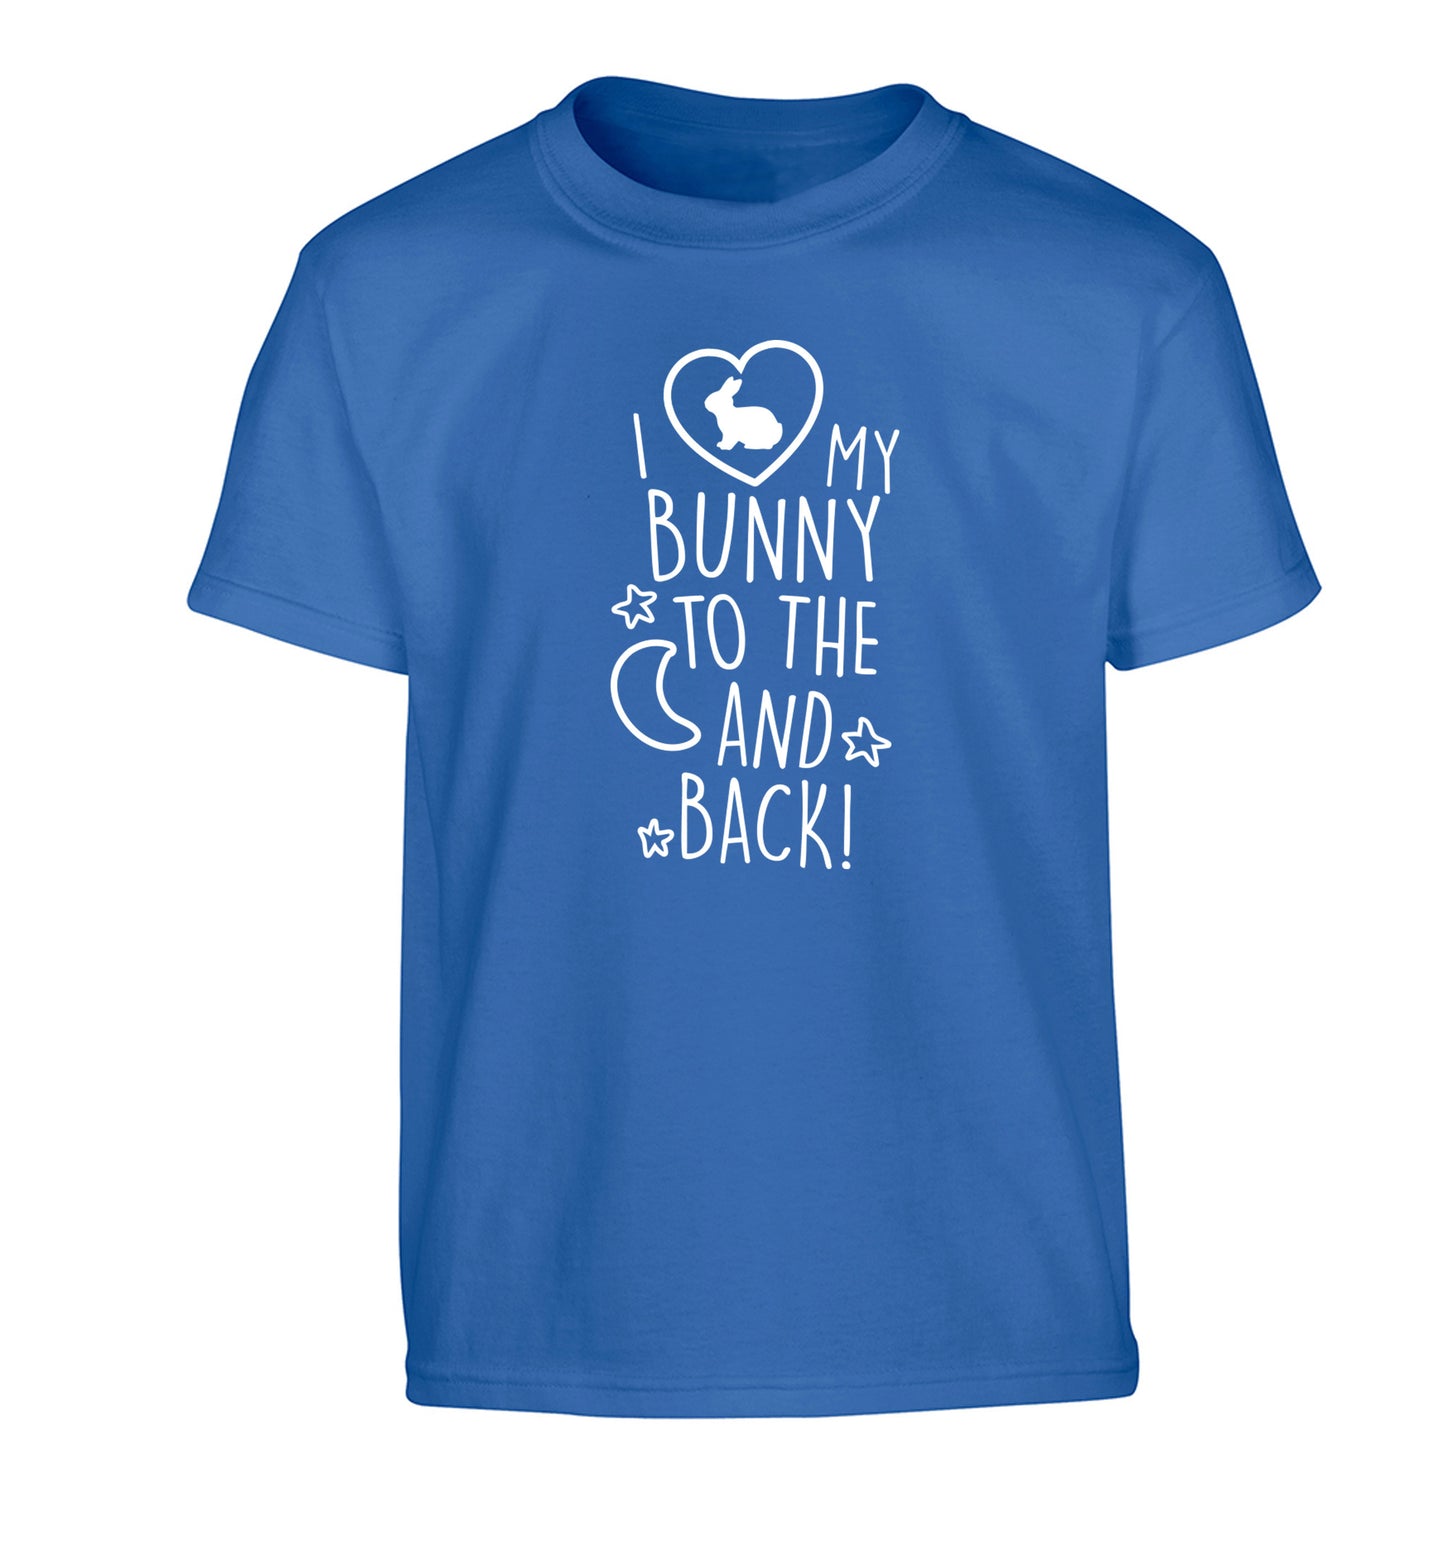 I love my bunny to the moon and back Children's blue Tshirt 12-14 Years